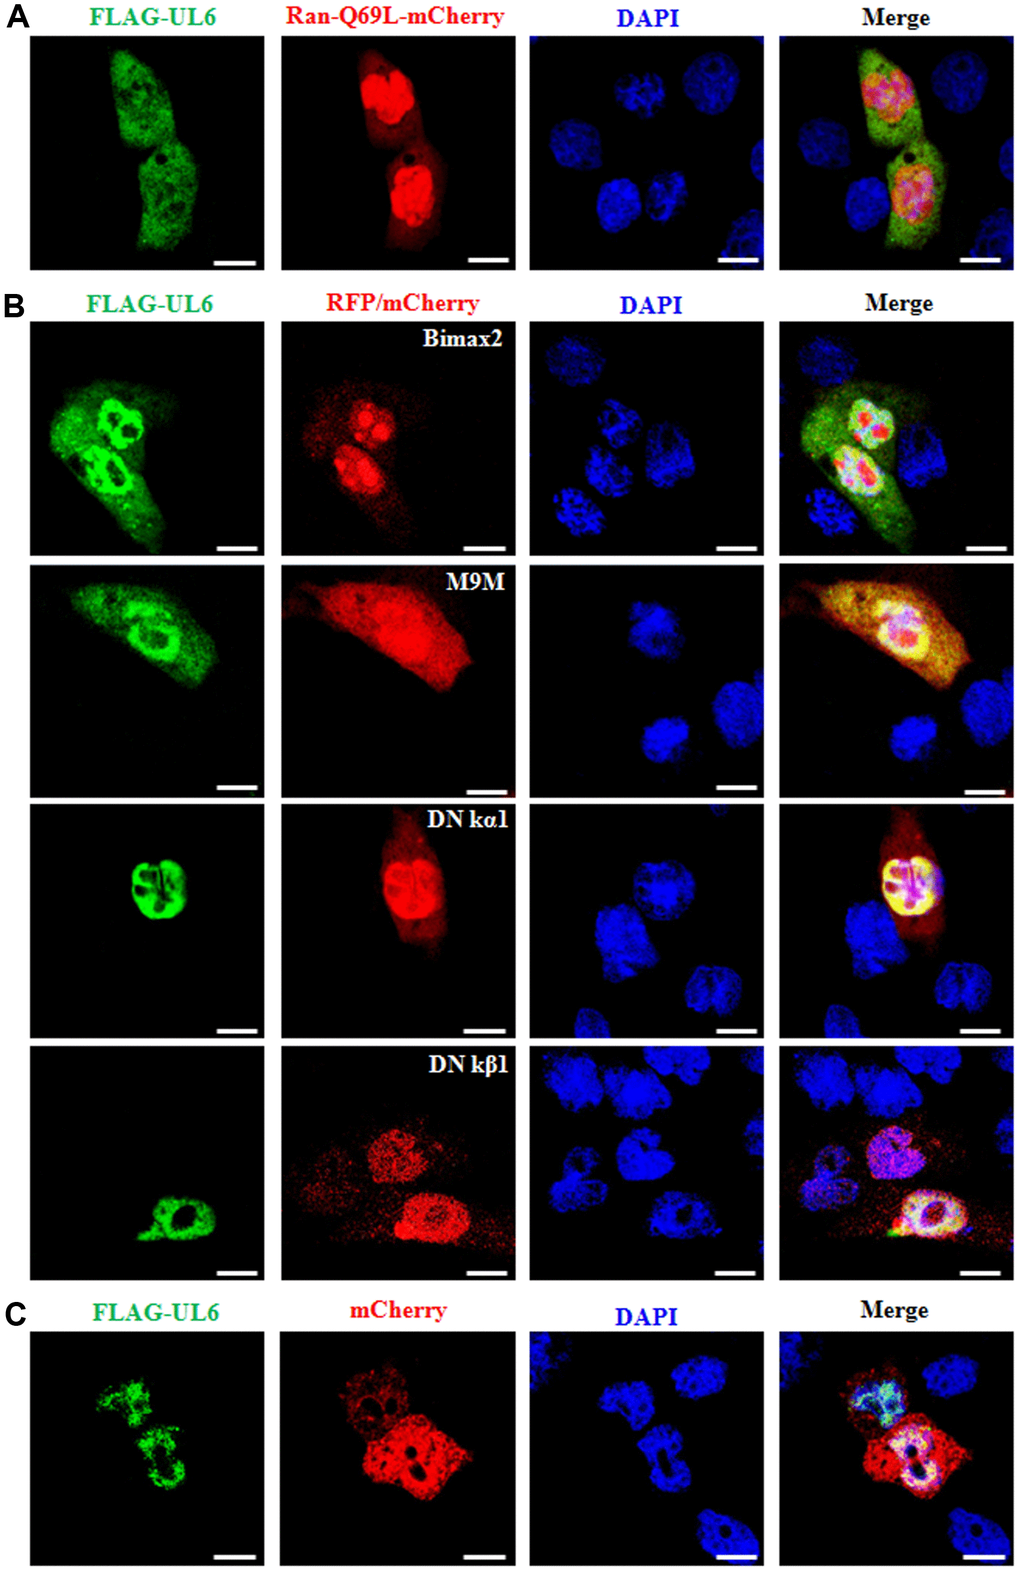 Nuclear import mechanism of UL6. (A) Fluorescence microscopy of COS-7 cells co-transfected with plasmids pFLAG-UL6 and pRan-Q69L-mCherry. (B) Fluorescence microscopy of COS-7 cells co-transfected with plasmid pFLAG-UL6 and plasmid encoding Bimax2-RFP, M9M-RFP, DN kα1-mCherry or DN kβ1-mCherry. (C) Fluorescence microscopy of COS-7 cells co-transfected with pFLAG-UL6 and pmCherry-N1. FITC-labeled proteins and mCherry fusion proteins were shown in its original color green and red, respectively, and the merged image was presented in yellow signal. All scale bars indicate 10 um, Statistical analysis of the fluorescence was shown in Table 3.